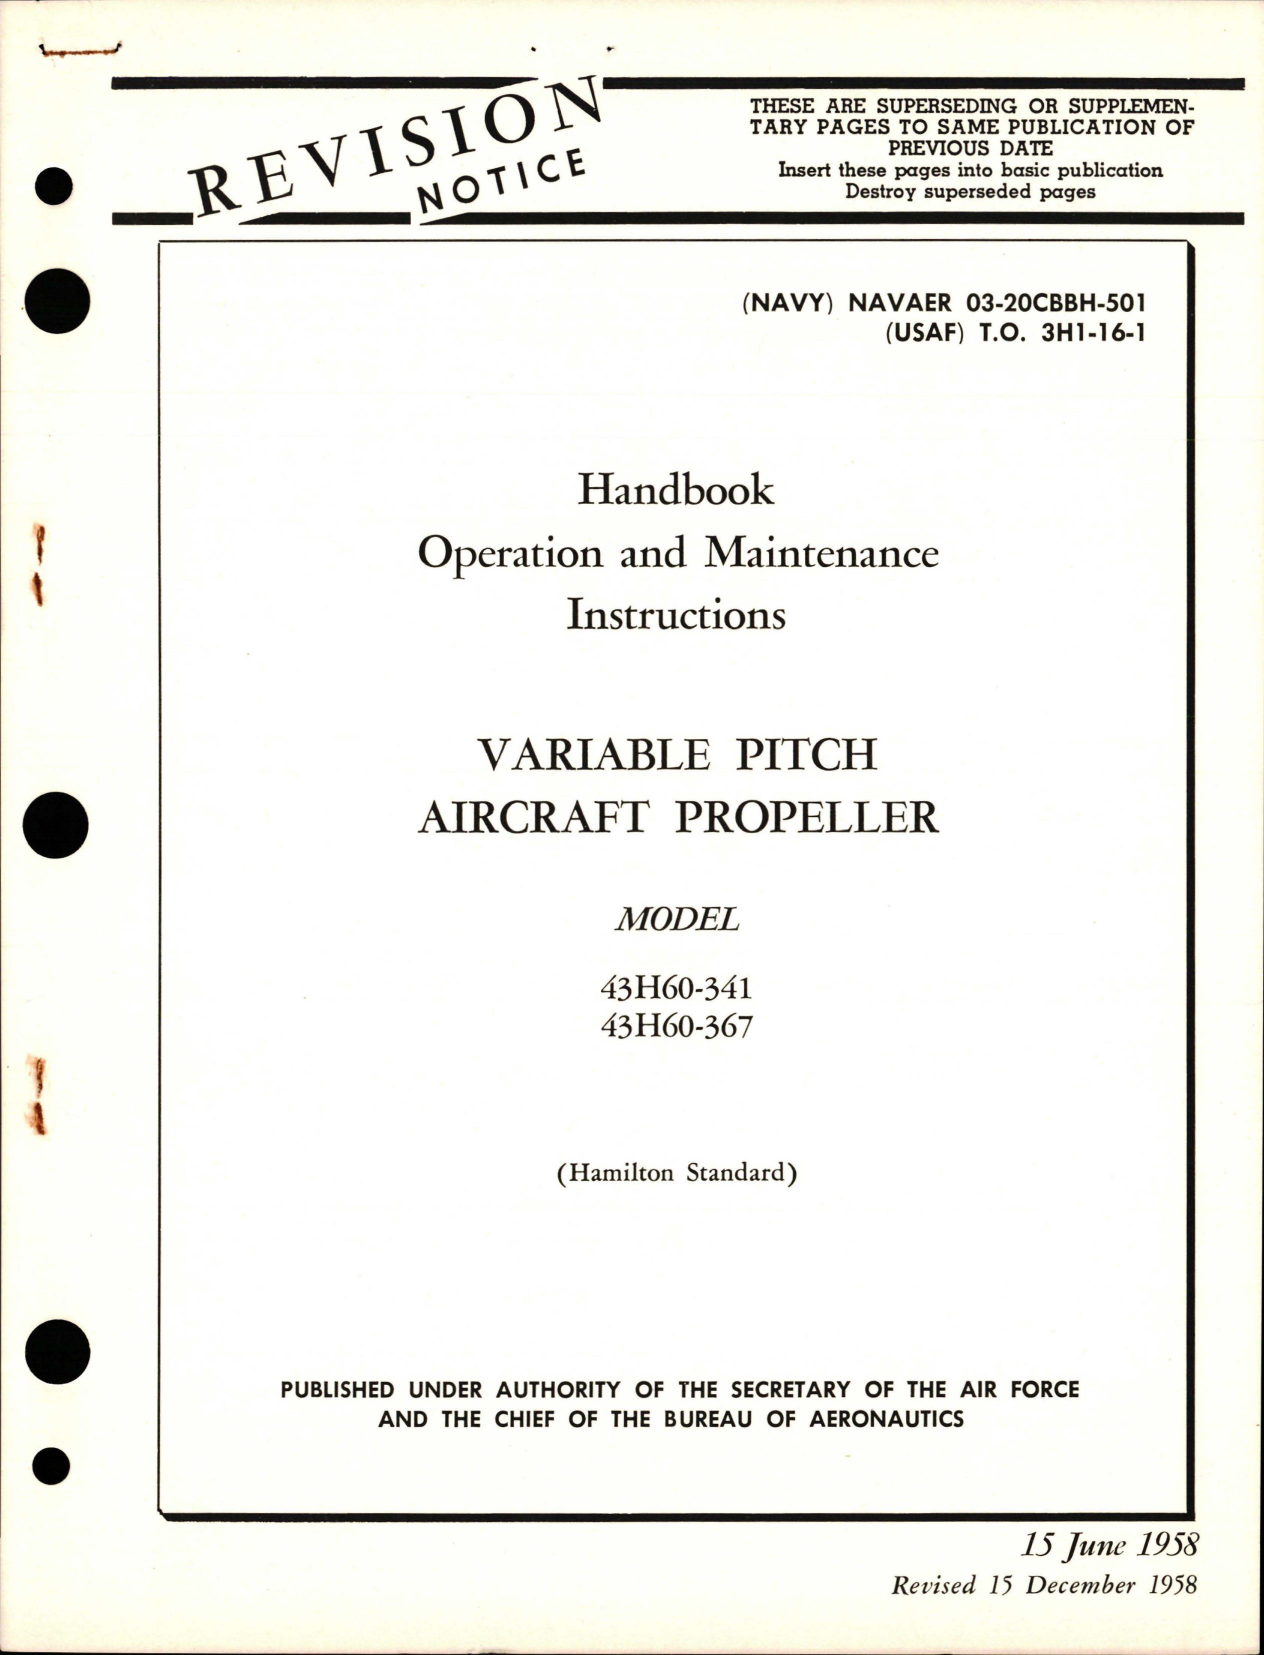 Sample page 1 from AirCorps Library document: Operation and Maintenance Instructions for Variable Pitch Propeller - Model 43H60-341 and 43H60-367